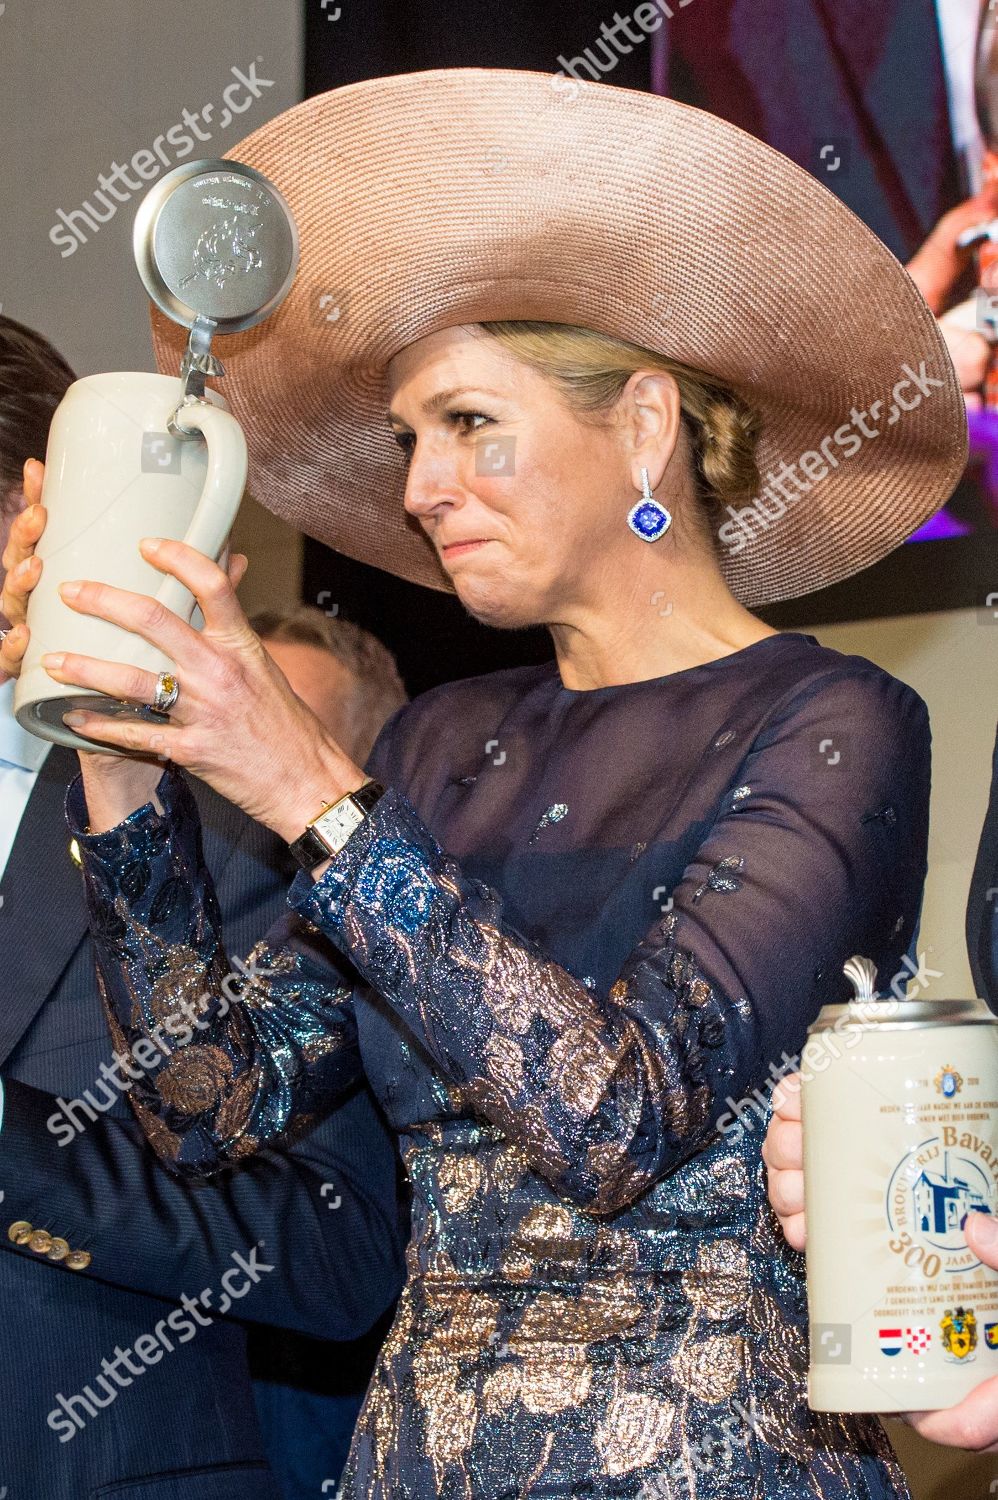 CASA REAL HOLANDESA - Página 69 Queen-maxima-visit-to-the-bavaria-brewery-lieshout-netherlands-shutterstock-editorial-10180868aw